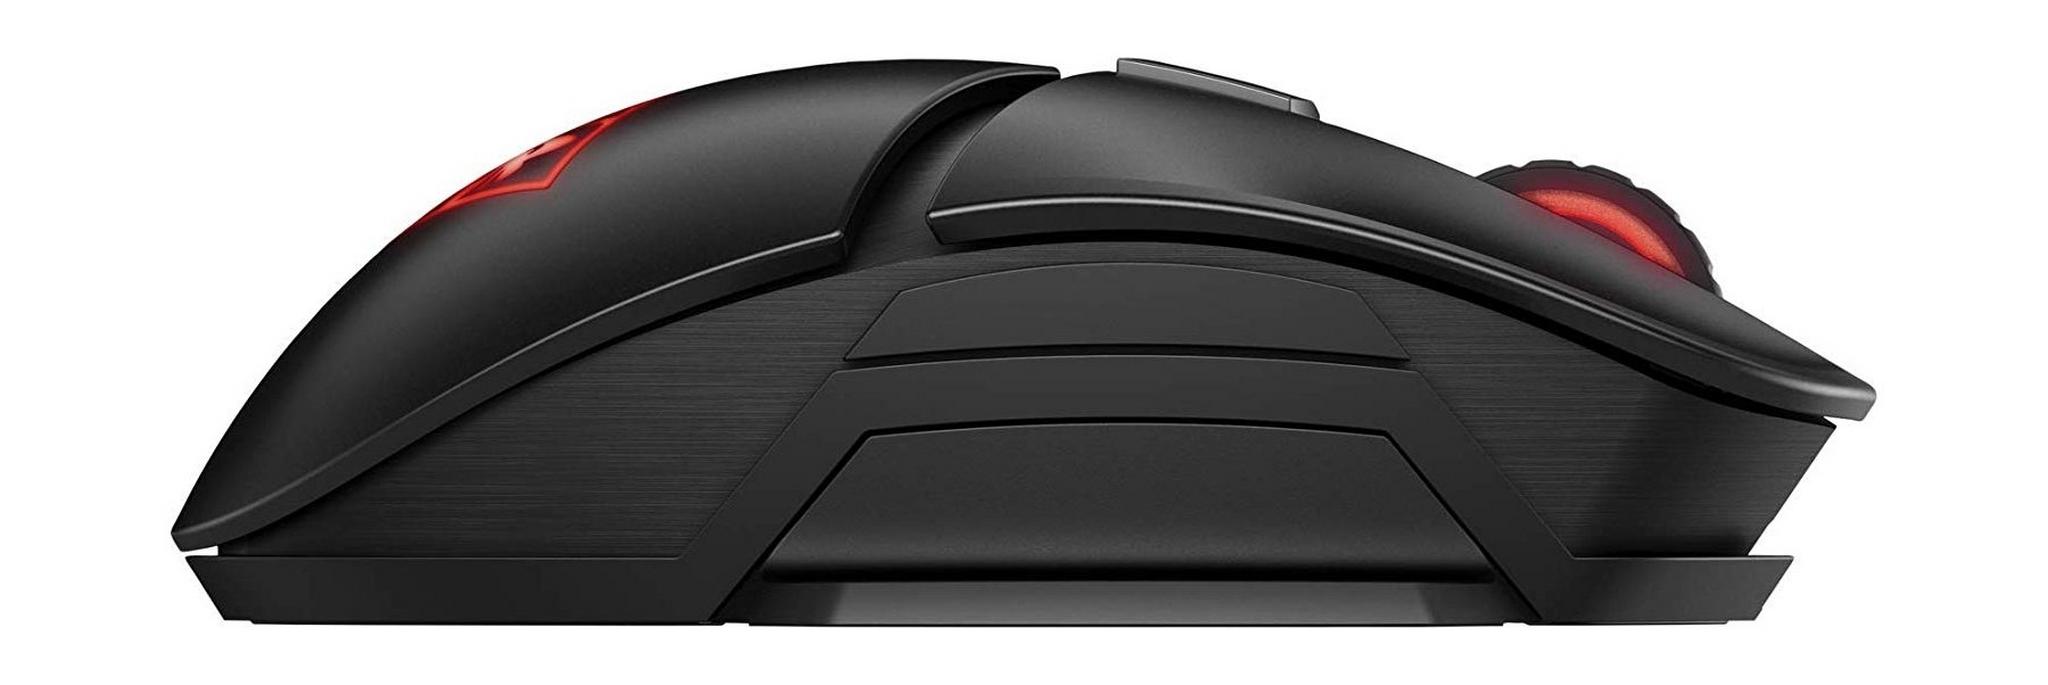 HP Omen Photon Wireless Gaming Mouse - Black